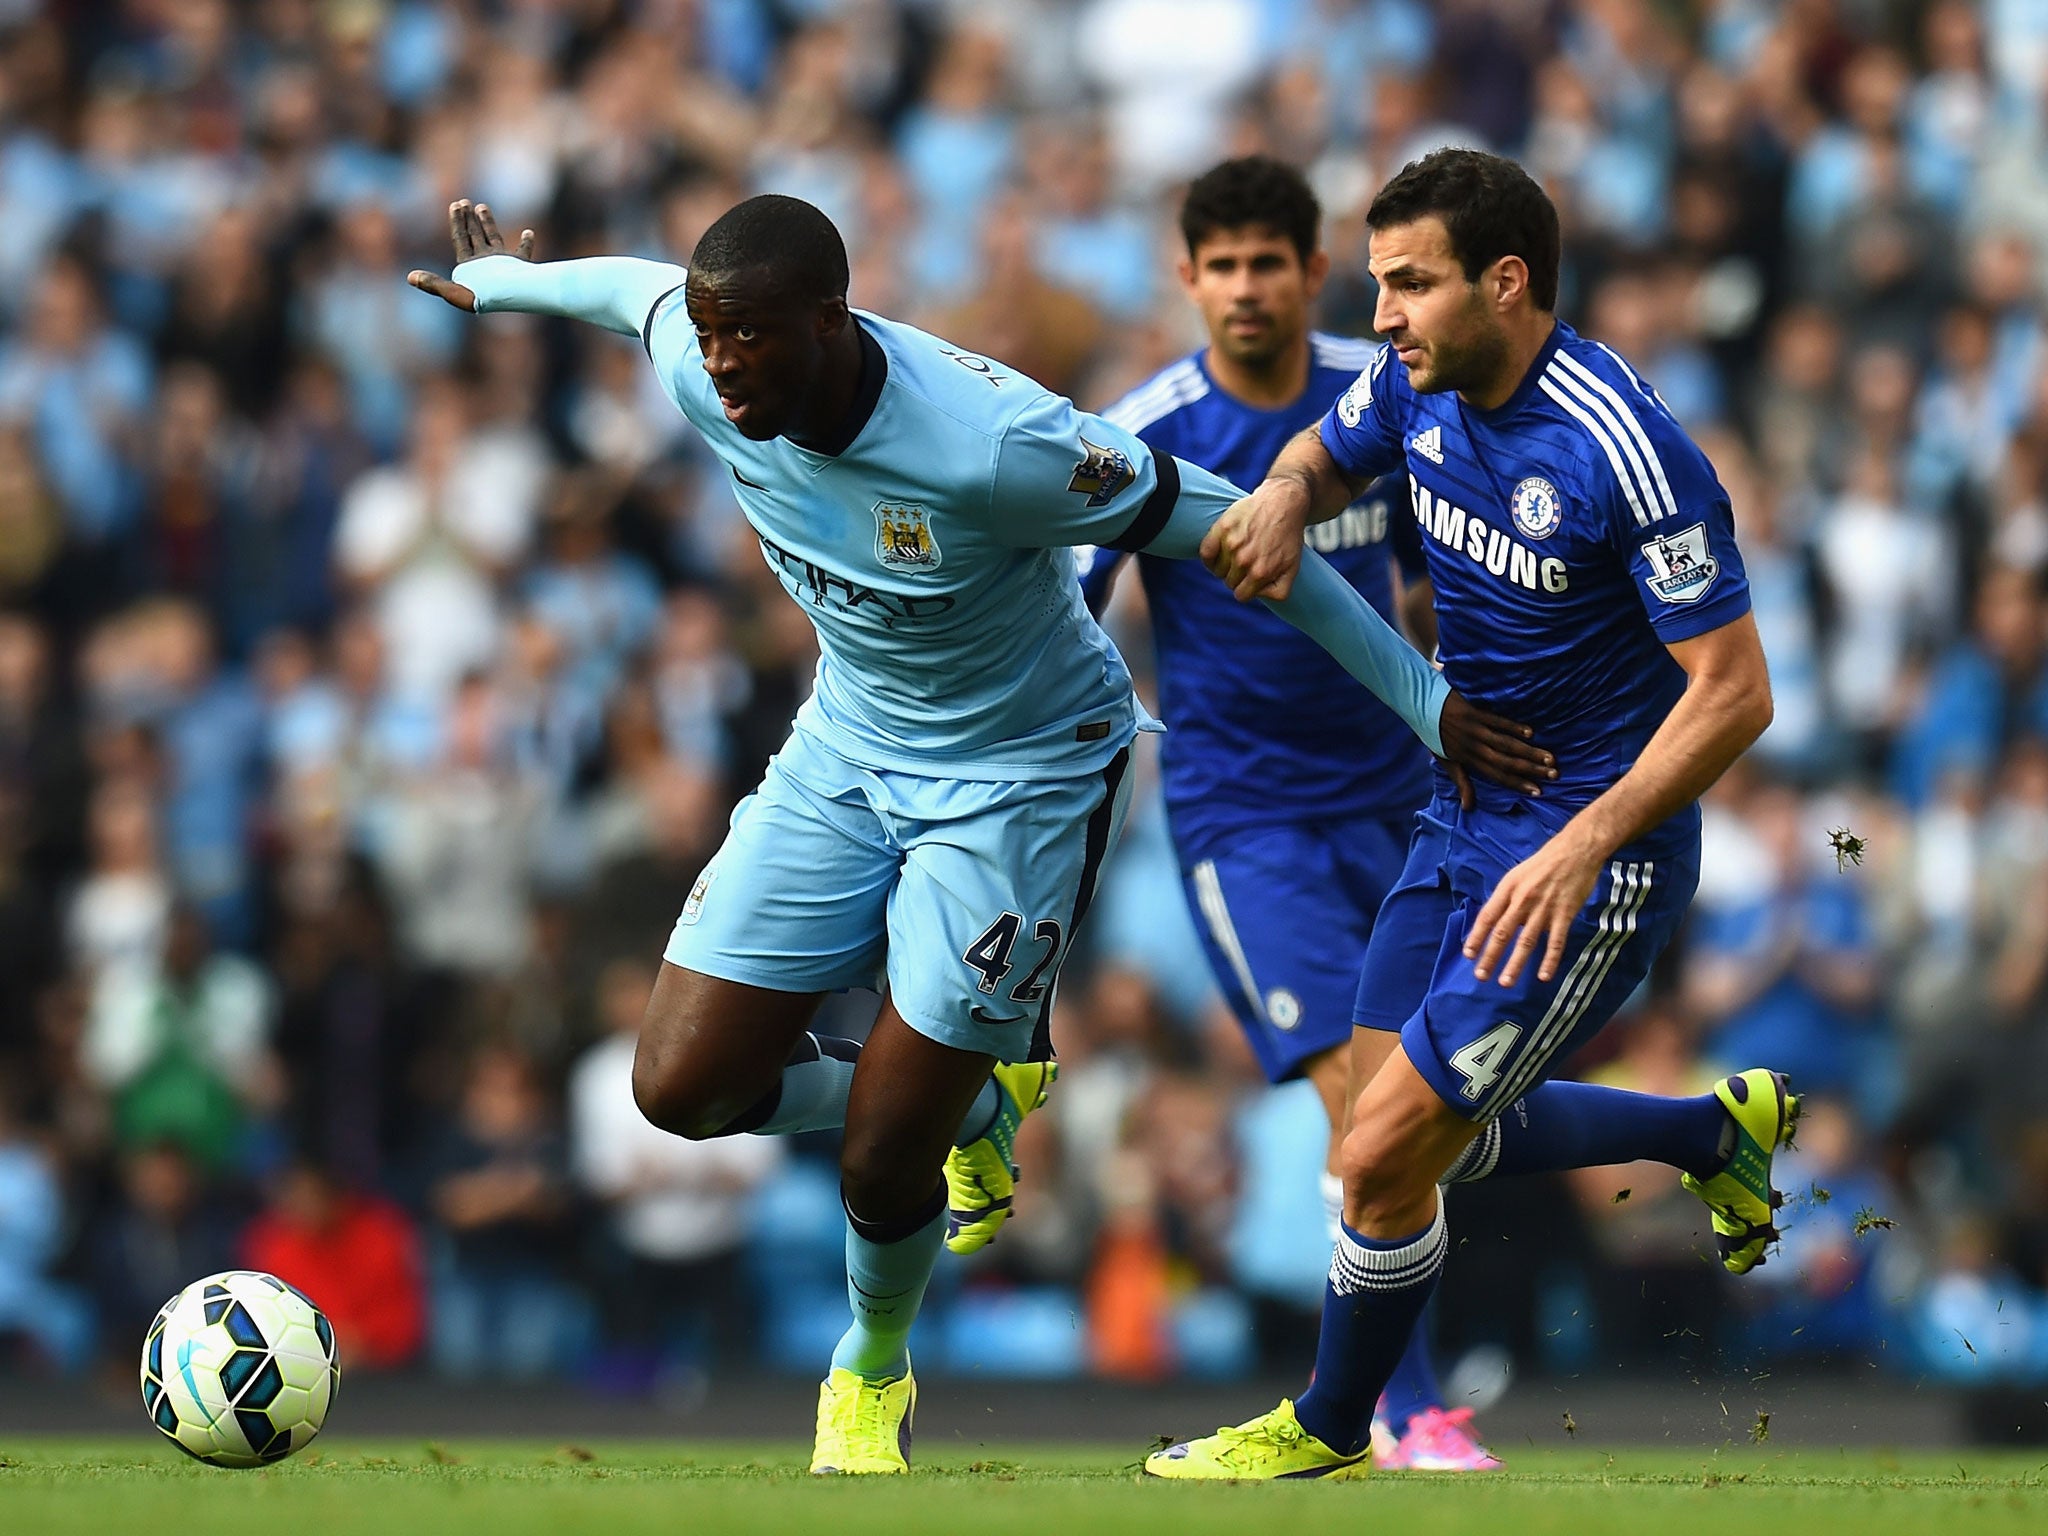 Yaya Touré in action for Manchester City against Chelsea yesterday. Conflicting versions of his relationship with City have emerged